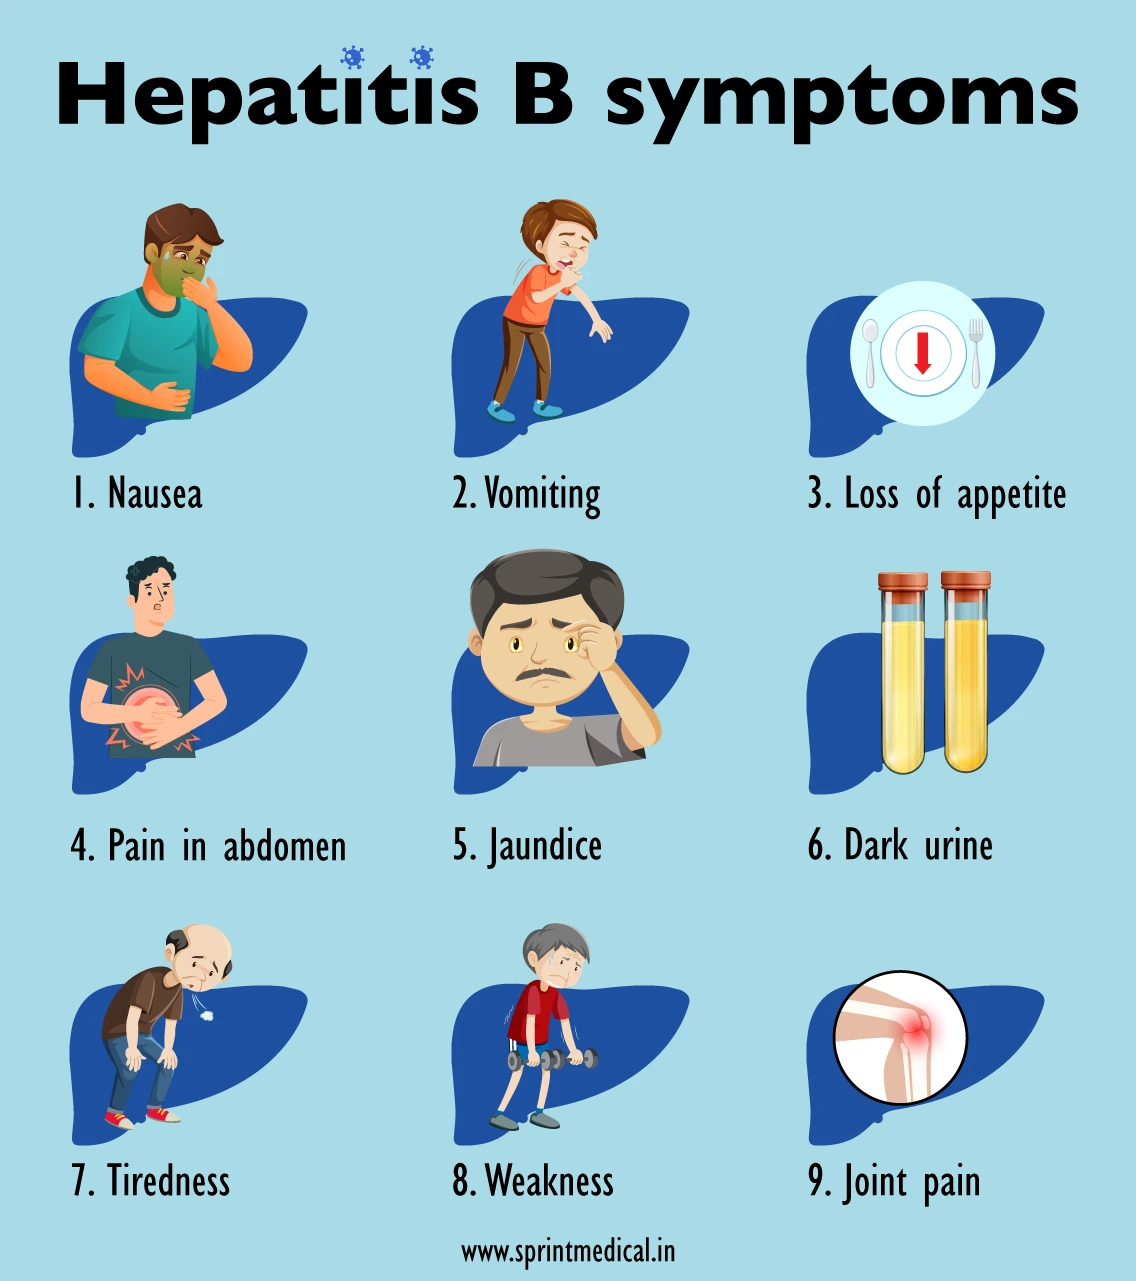 Hepatitis B - Symptoms, Treatment, Prevention, and More | Sprint Medical